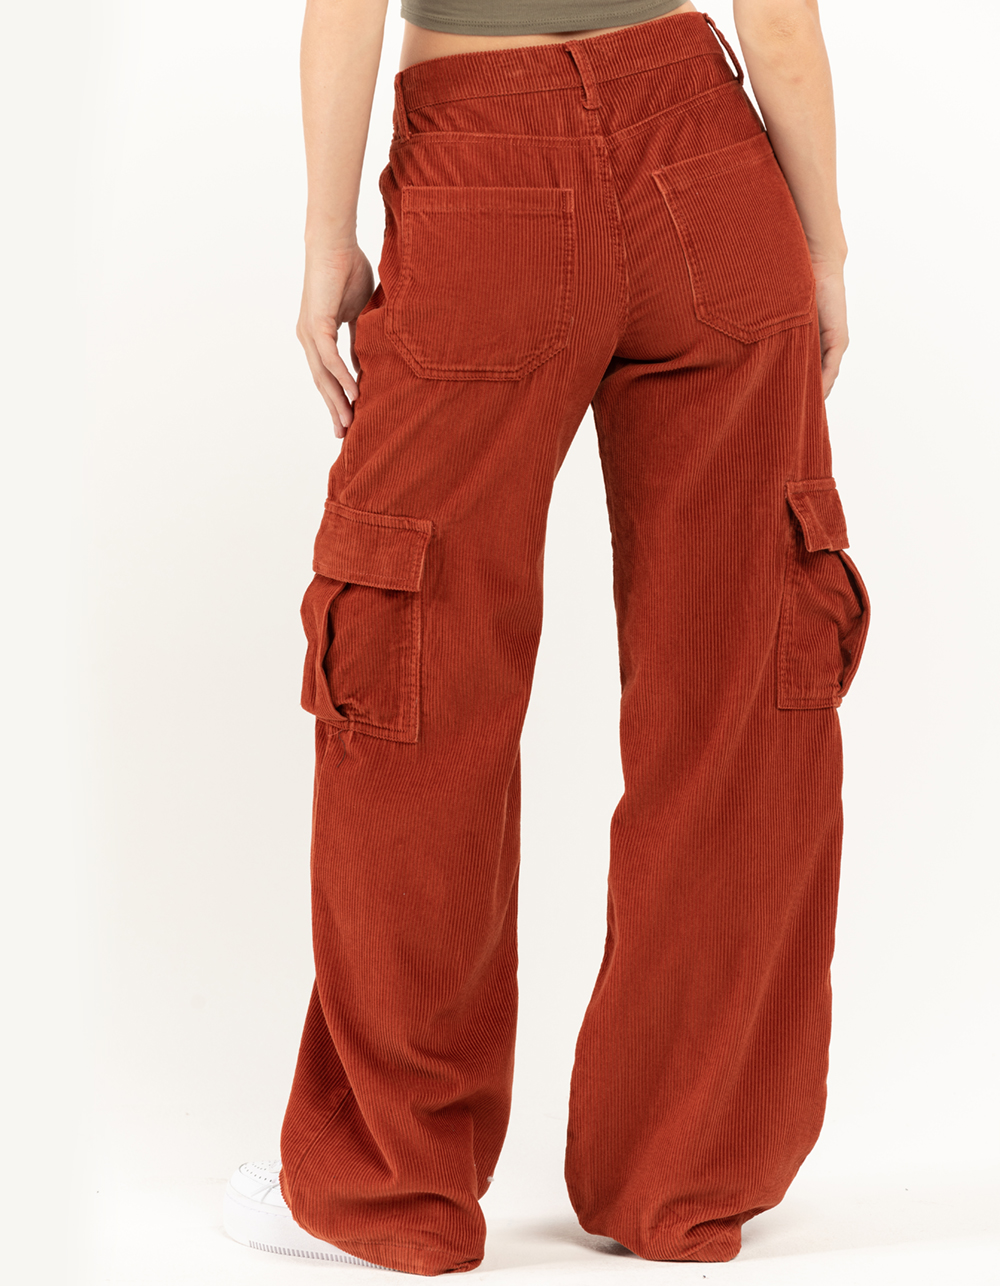 RSQ Womens Low Rise Cargo Corduroy Puddle Pants - SUNBAKED | Tillys